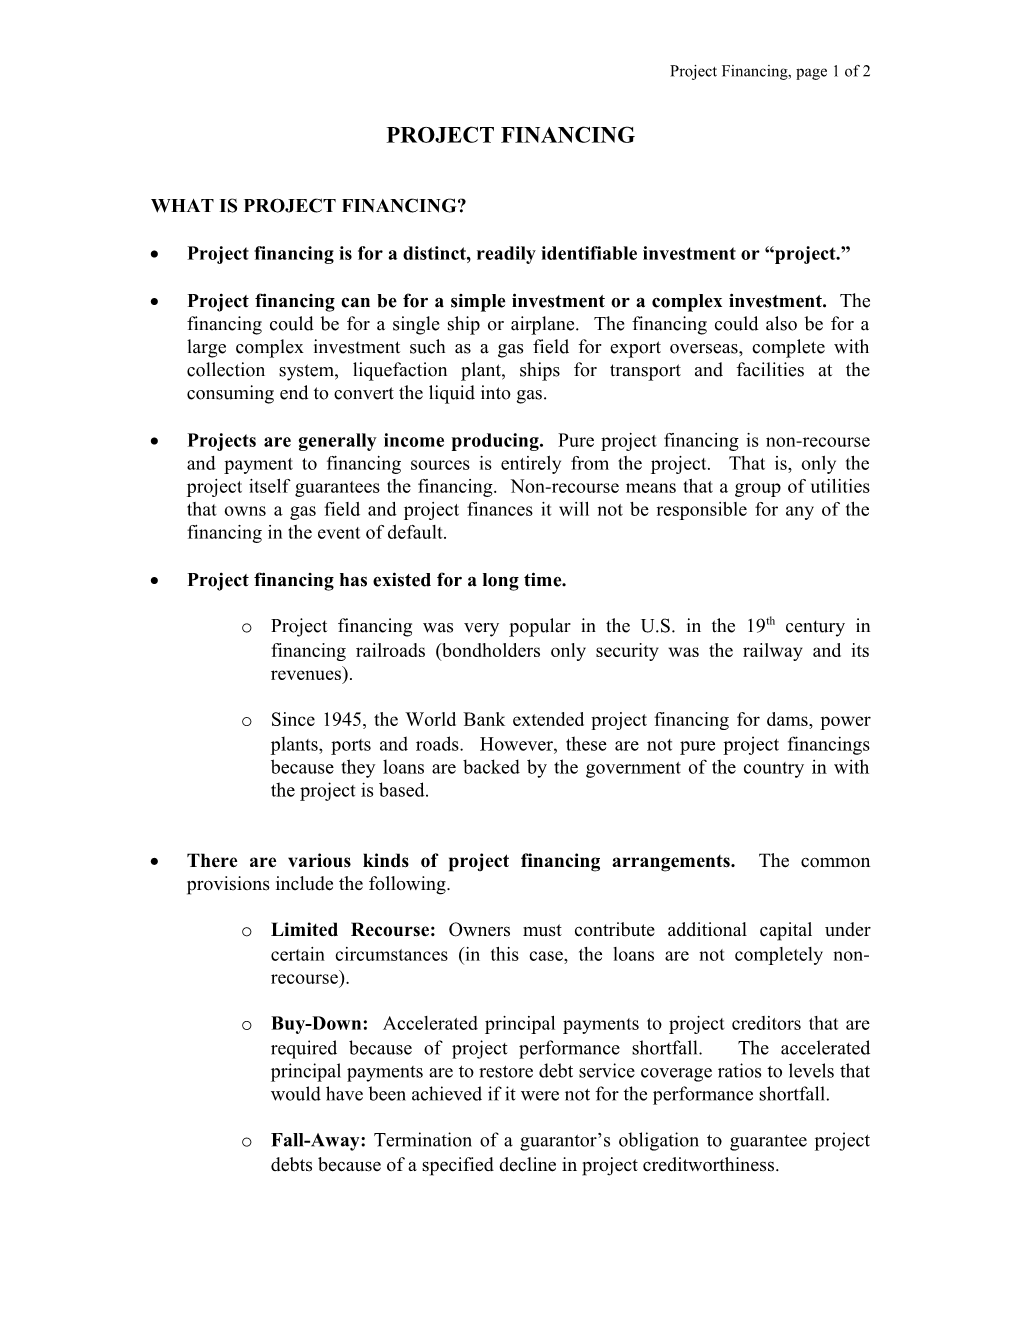 Project Financing, Page 1 of 2